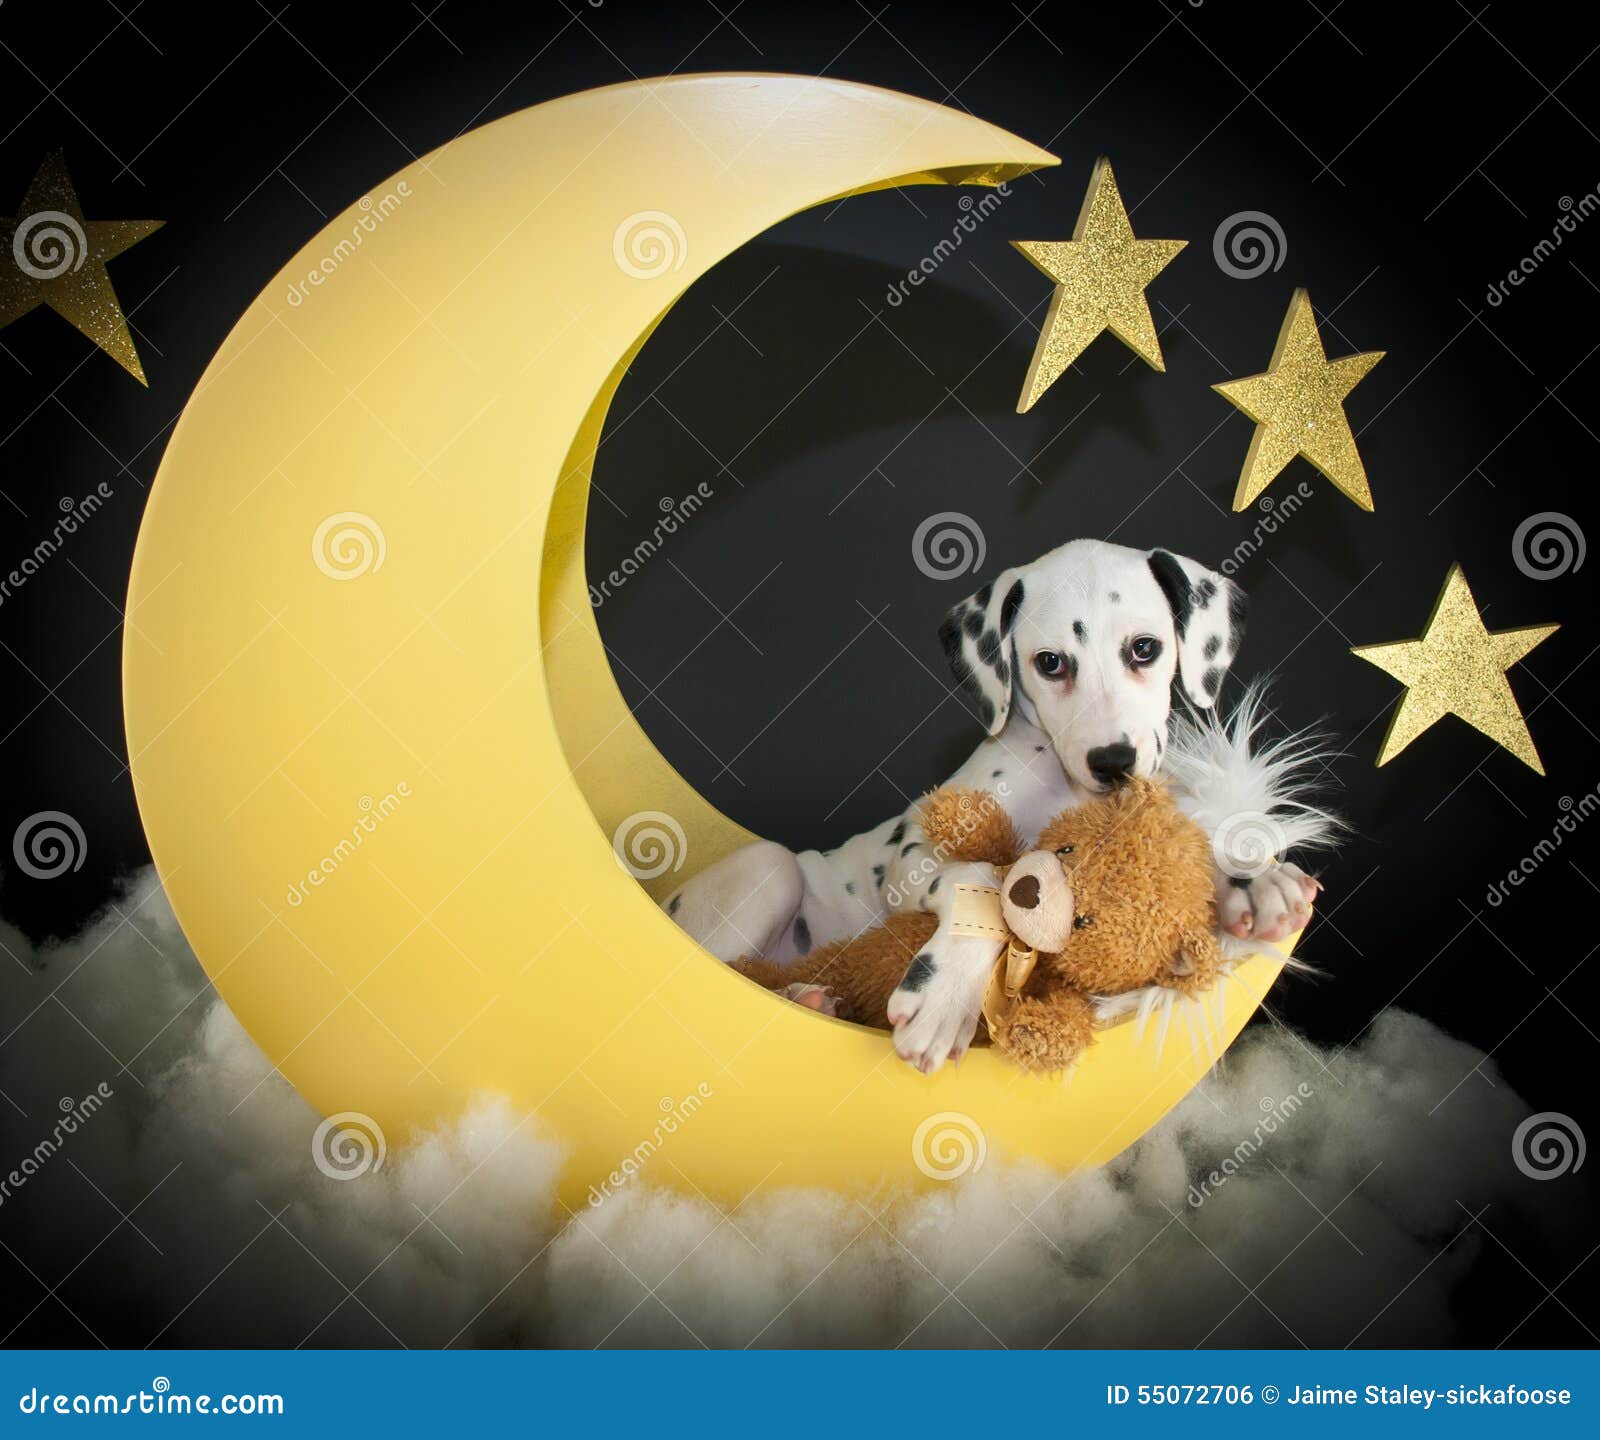 i-love-you-to-moon-back-very-cute-dalmatian-puppy-laying-crescent-his-teddy-bear-55072706.jpg